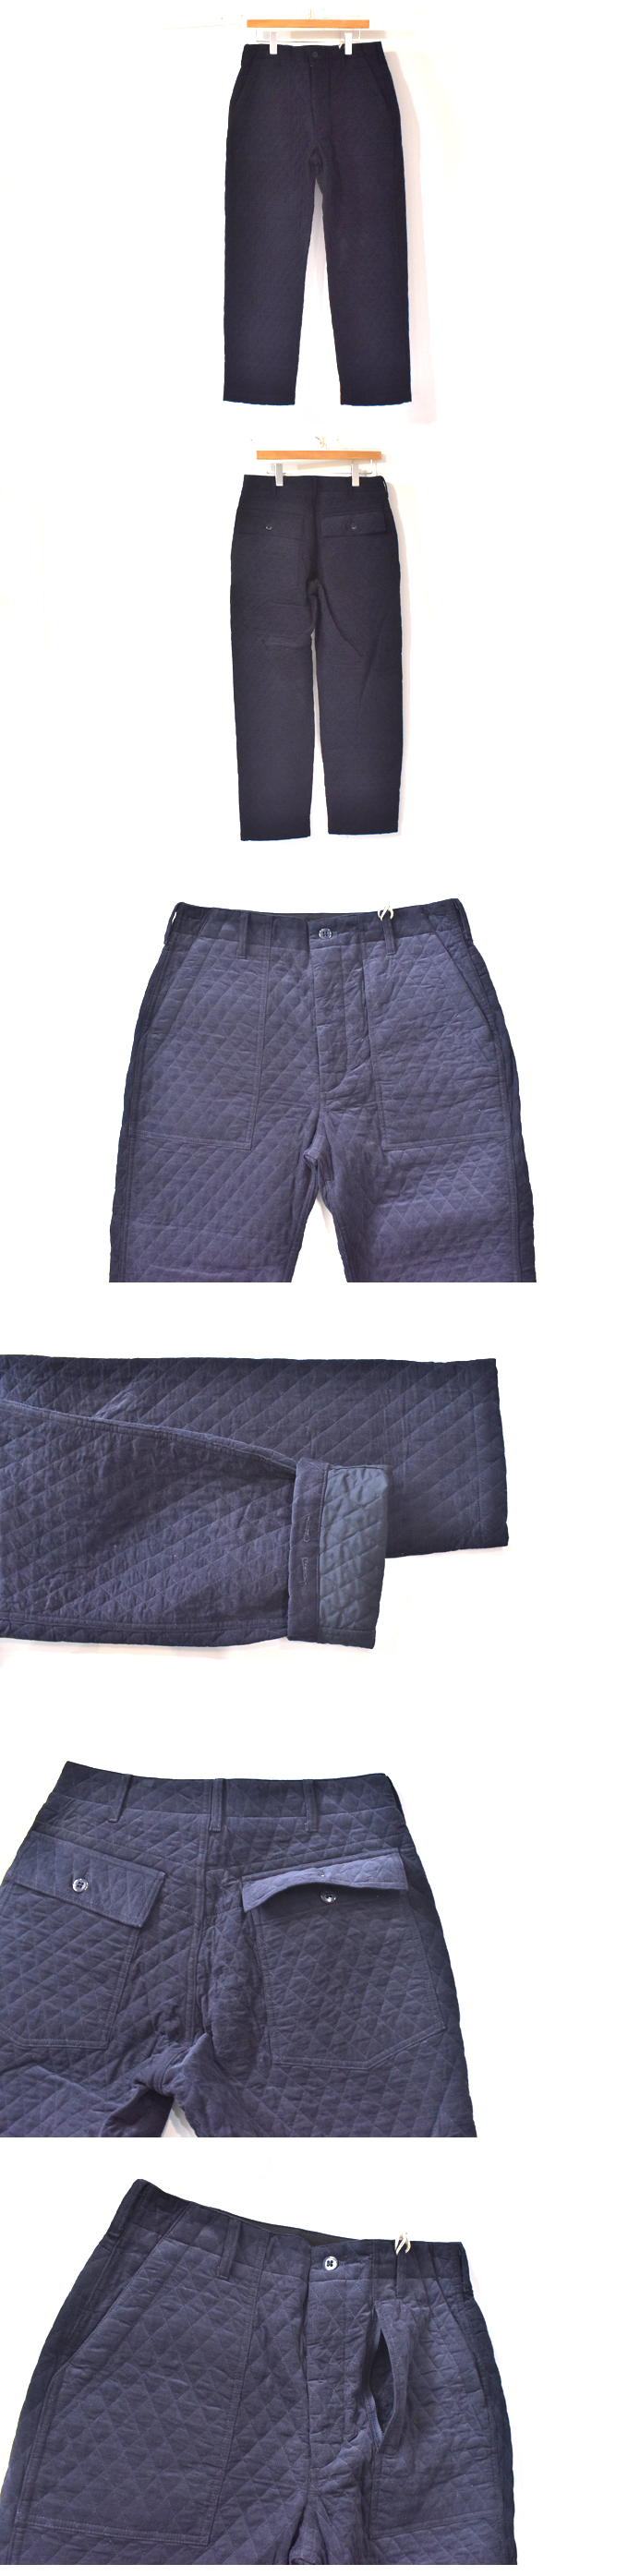 ENGINEERED GARMENTS FATIGUE PANT - CP QUILTED CORDUROY